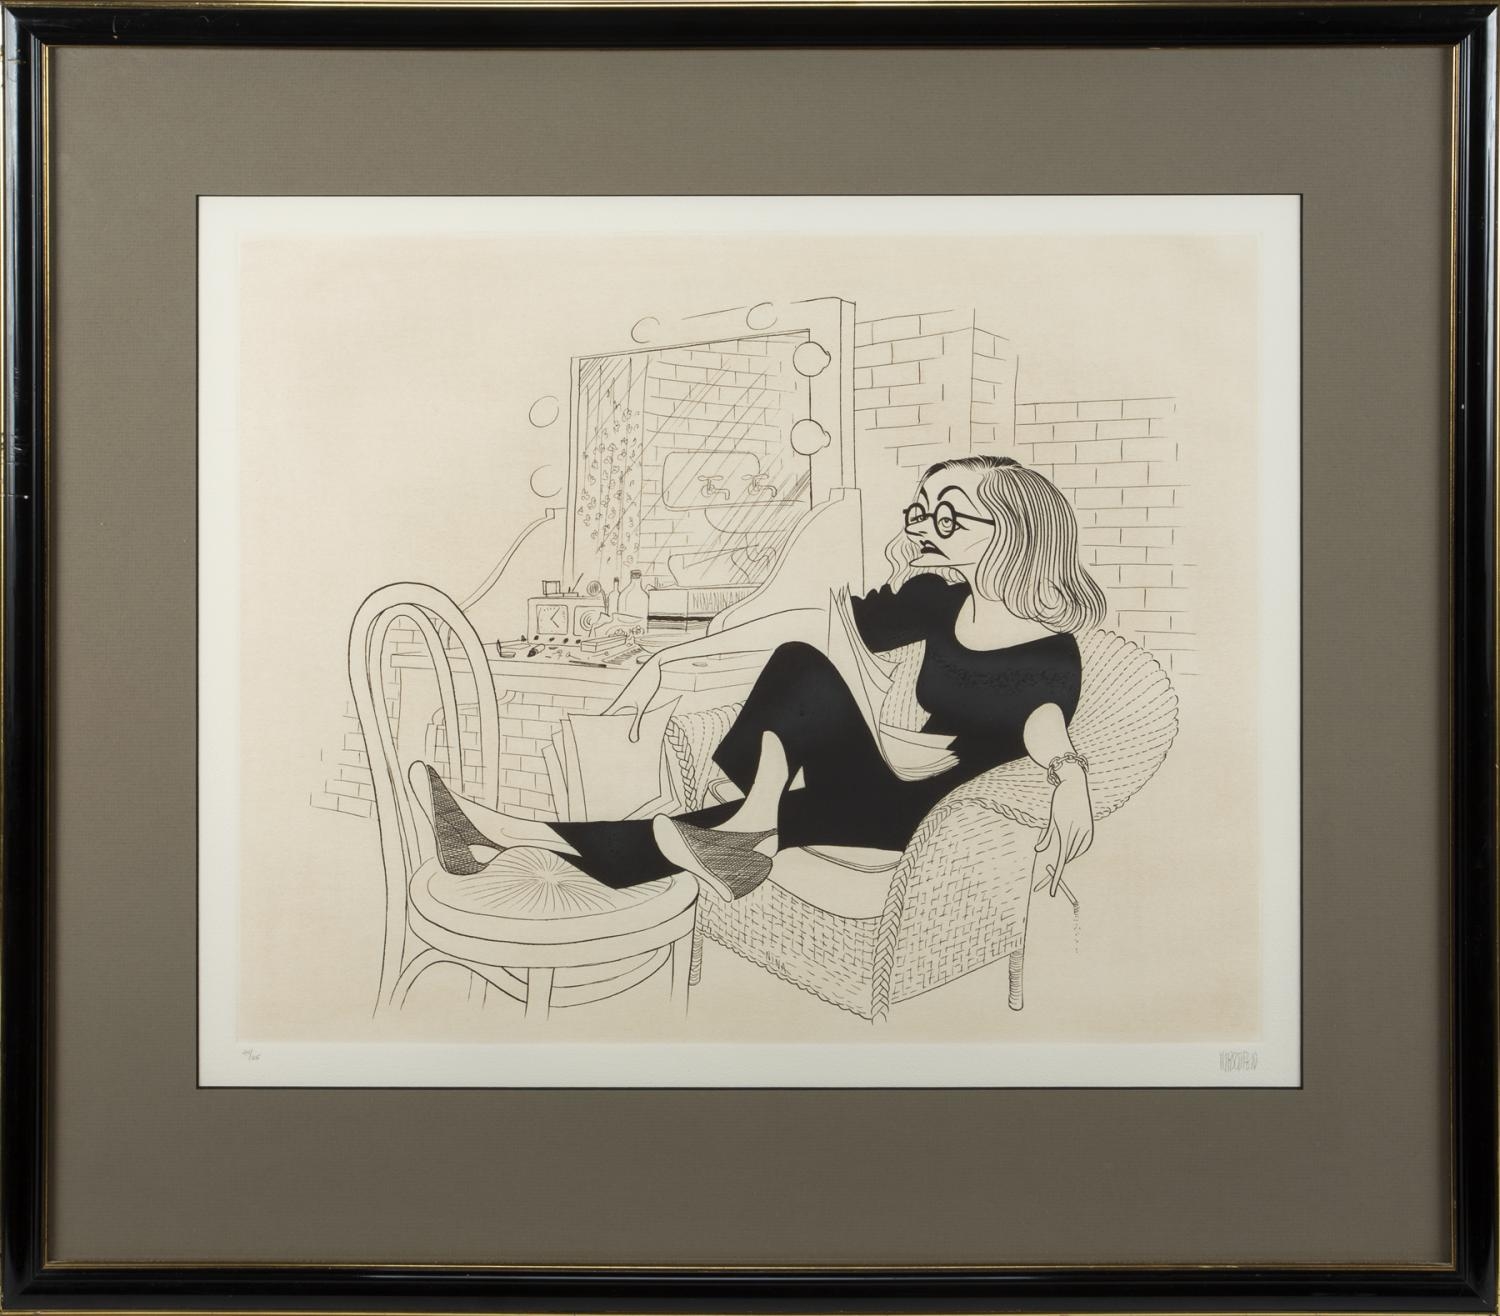 Tallulah Bankhead Backstage at the Orpheum Theatre by Al Hirschfeld, 1965